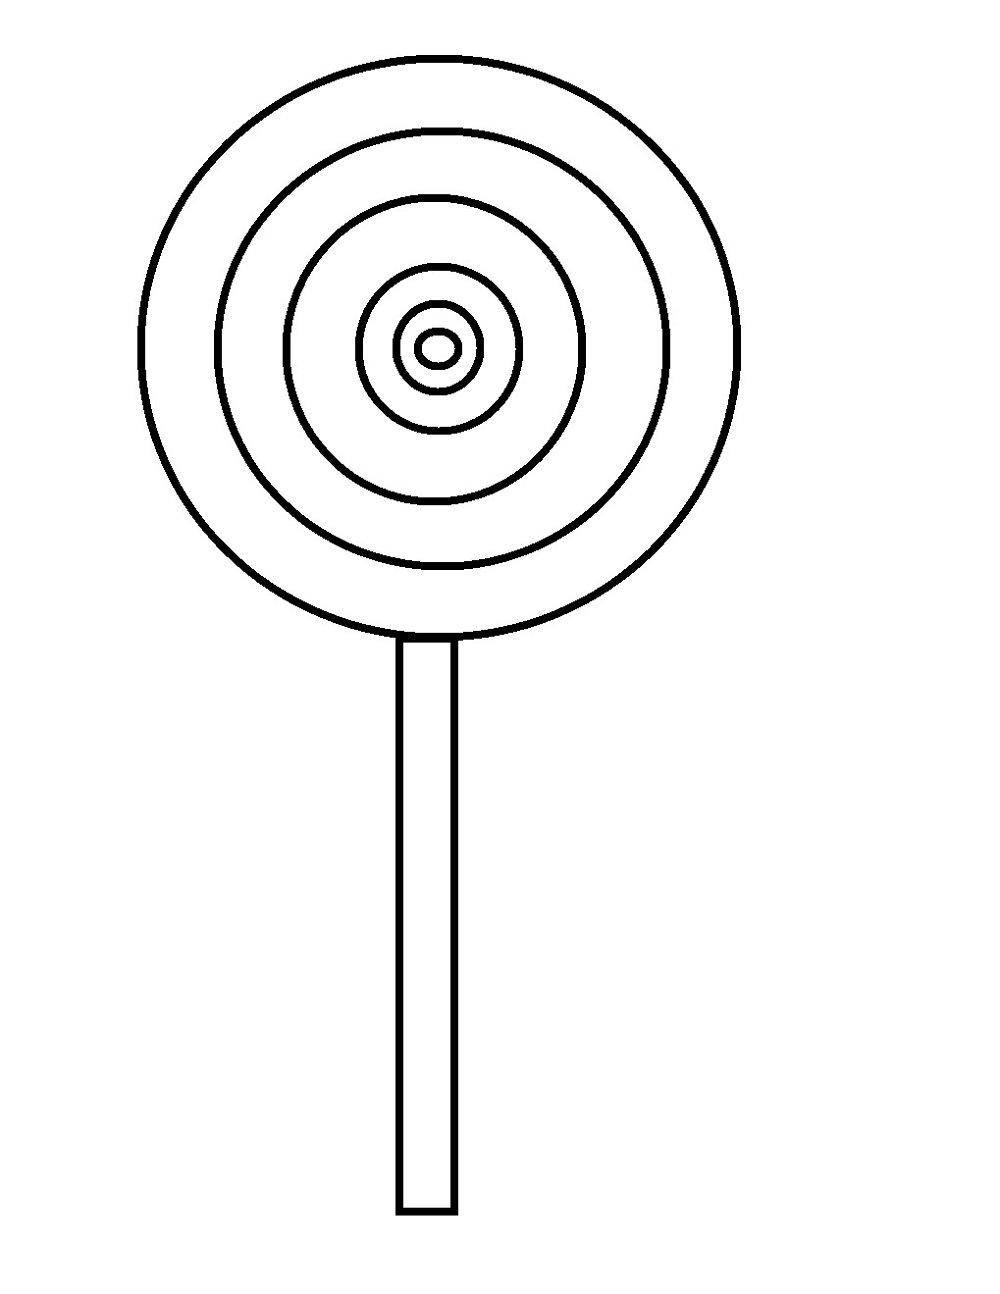 Lollipop Coloring Page Lollipop Coloring Page For Young And Old Educative Printable